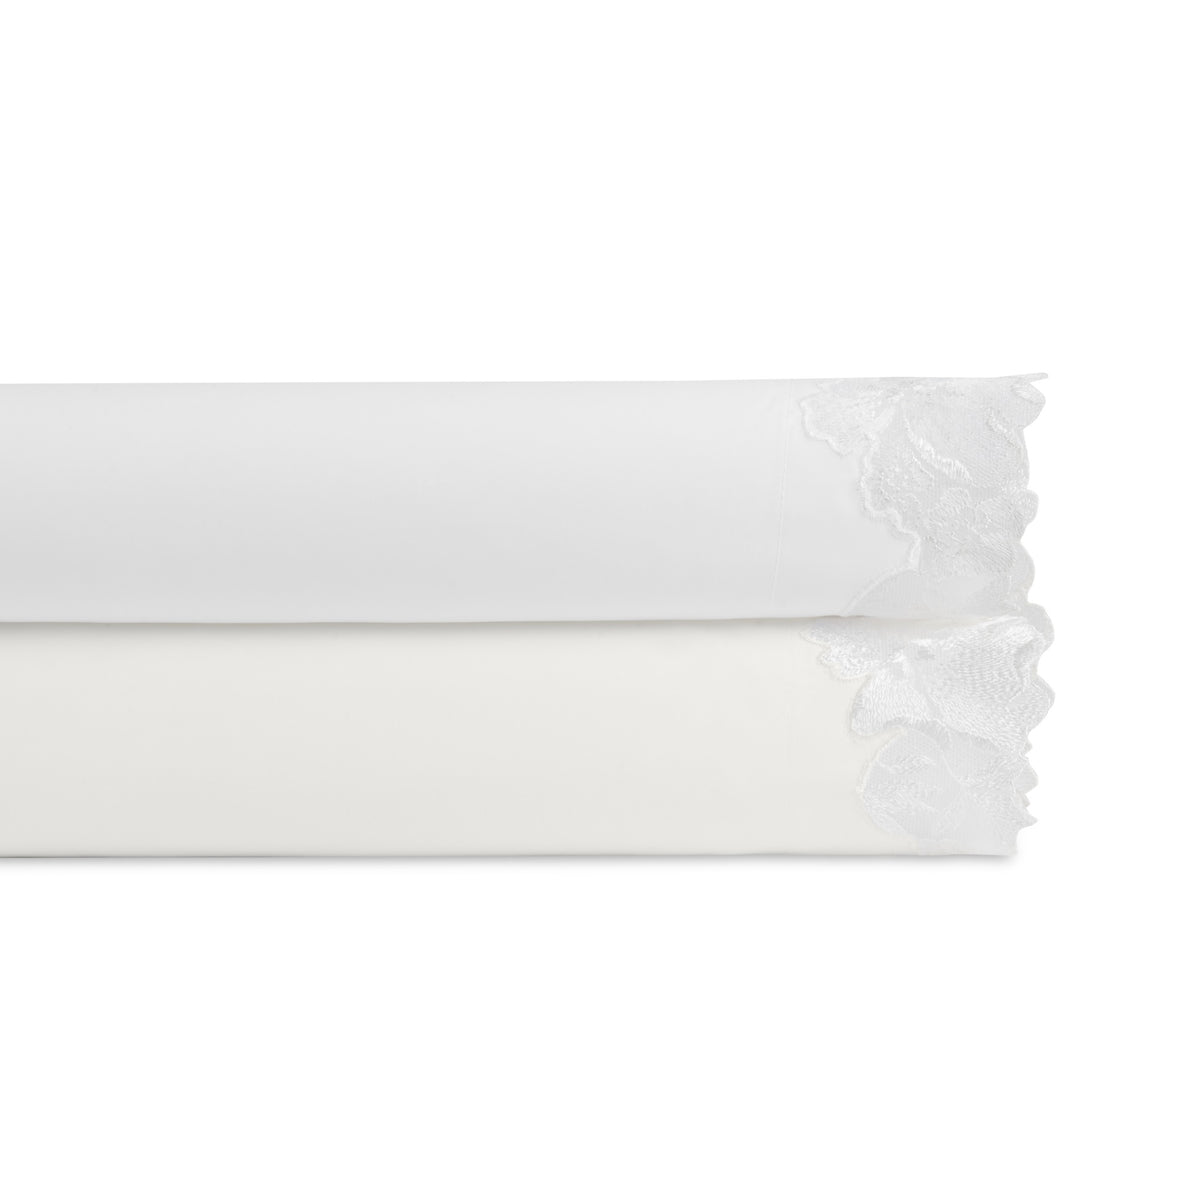 Stack of Matouk Virginia Bedding in Bone and White Color